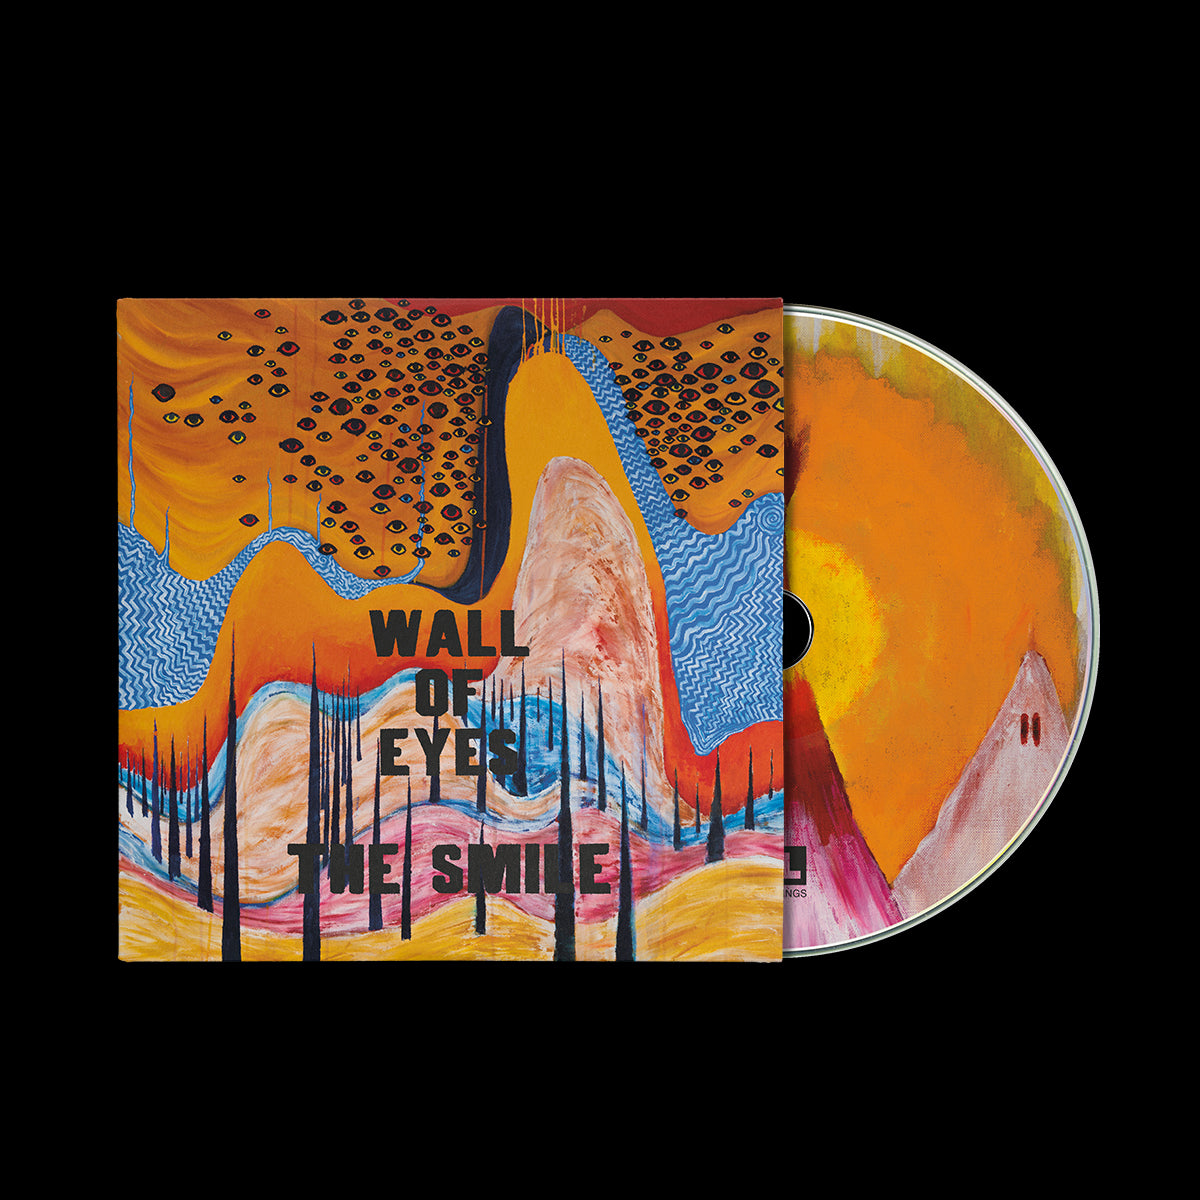 
                  
                    The Smile - Wall of Eyes | Buy the Vinyl LP from Flying Nun Records
                  
                